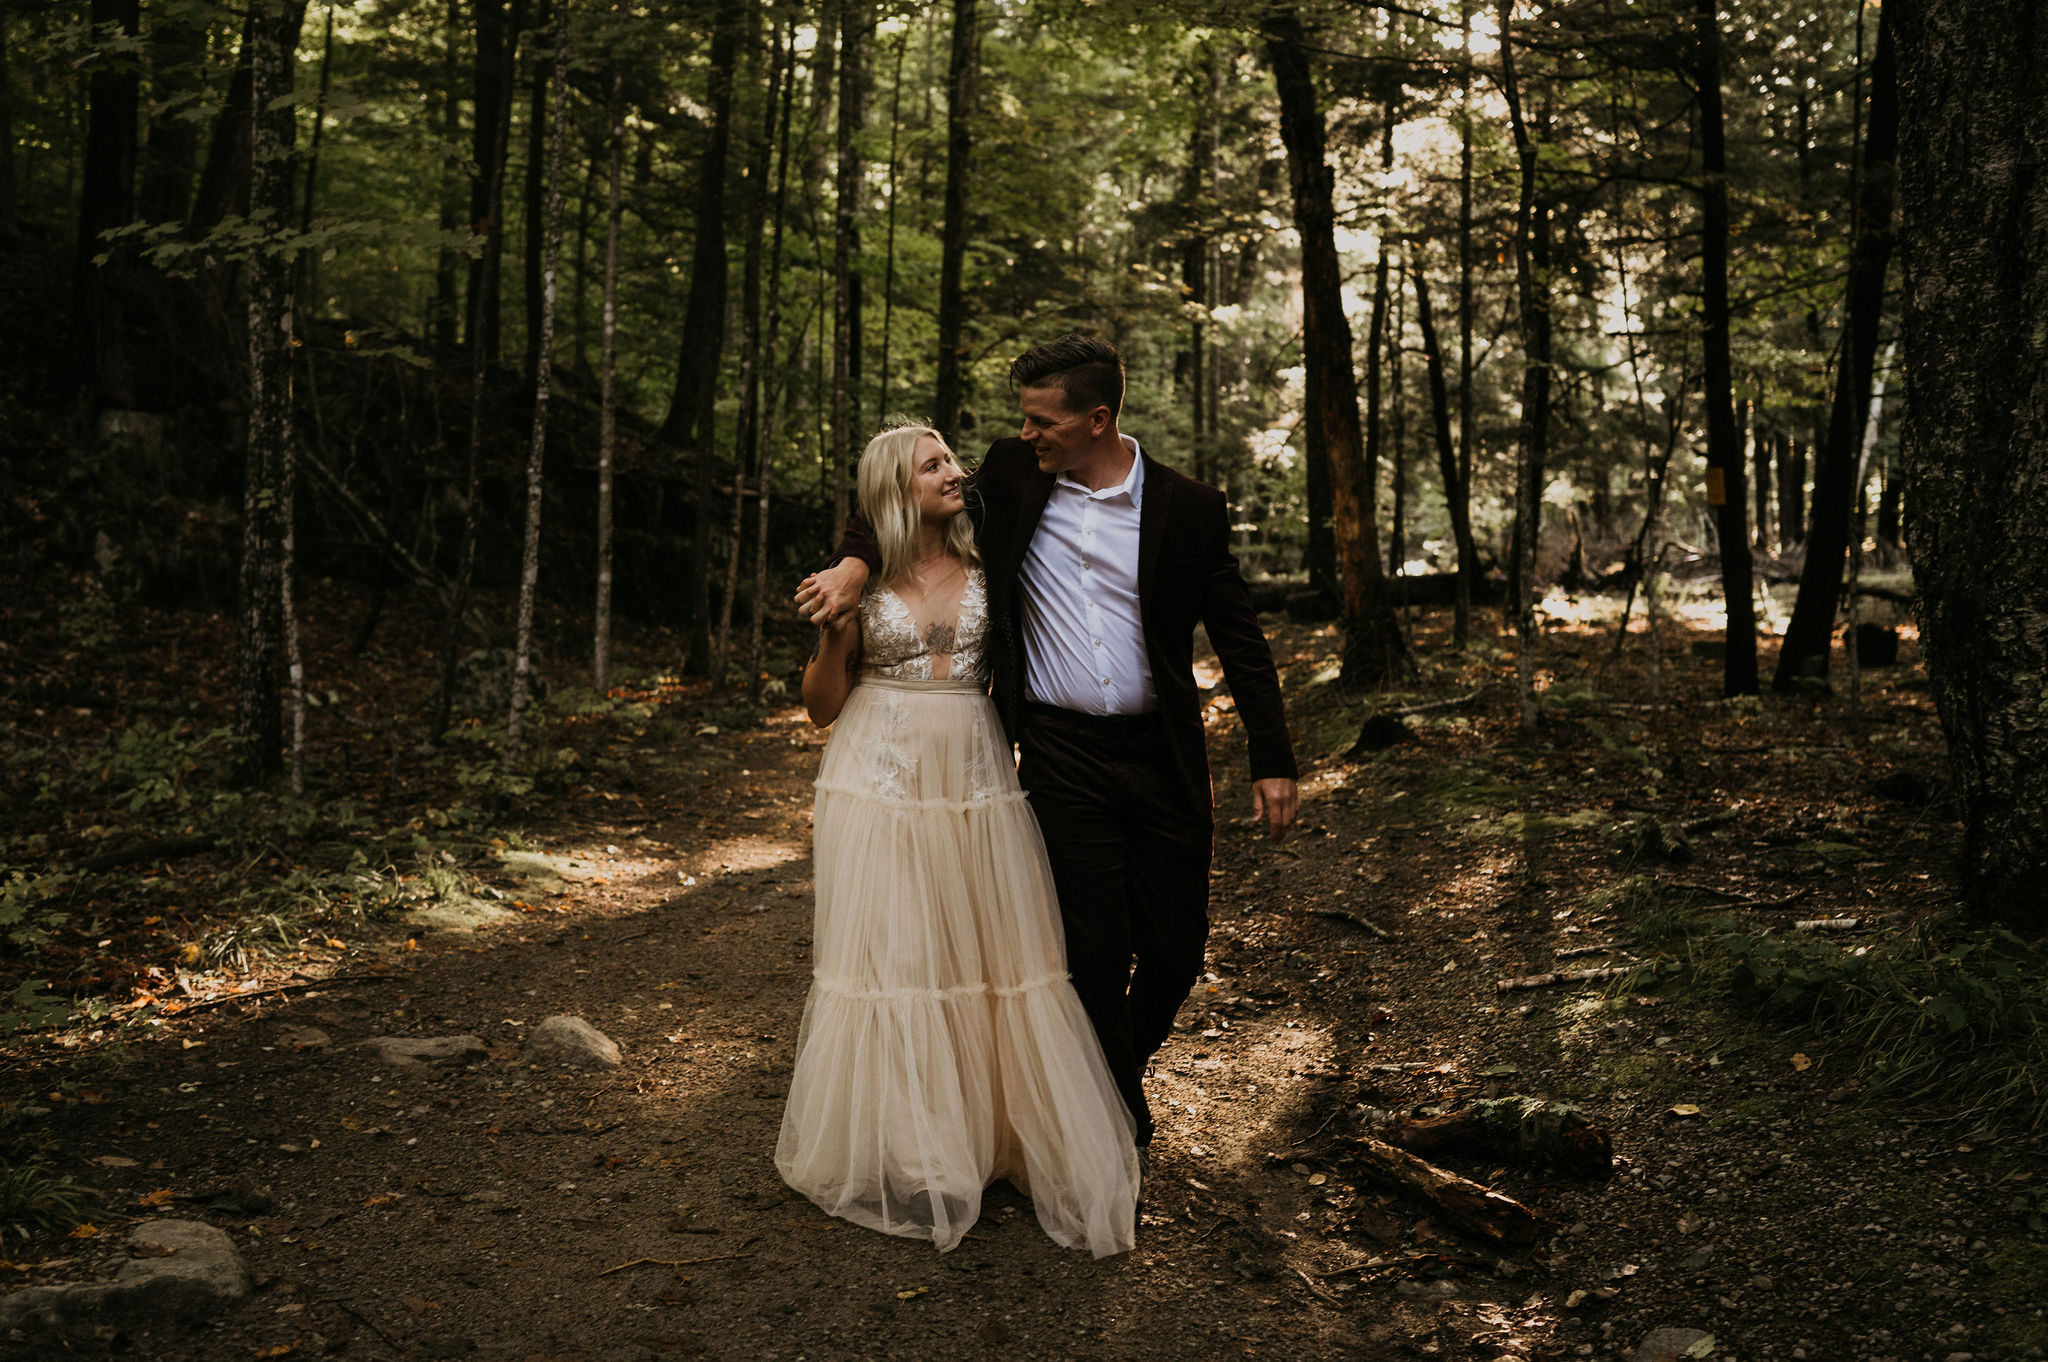 Adventure Elopements: A Glimpse Behind The Scenes